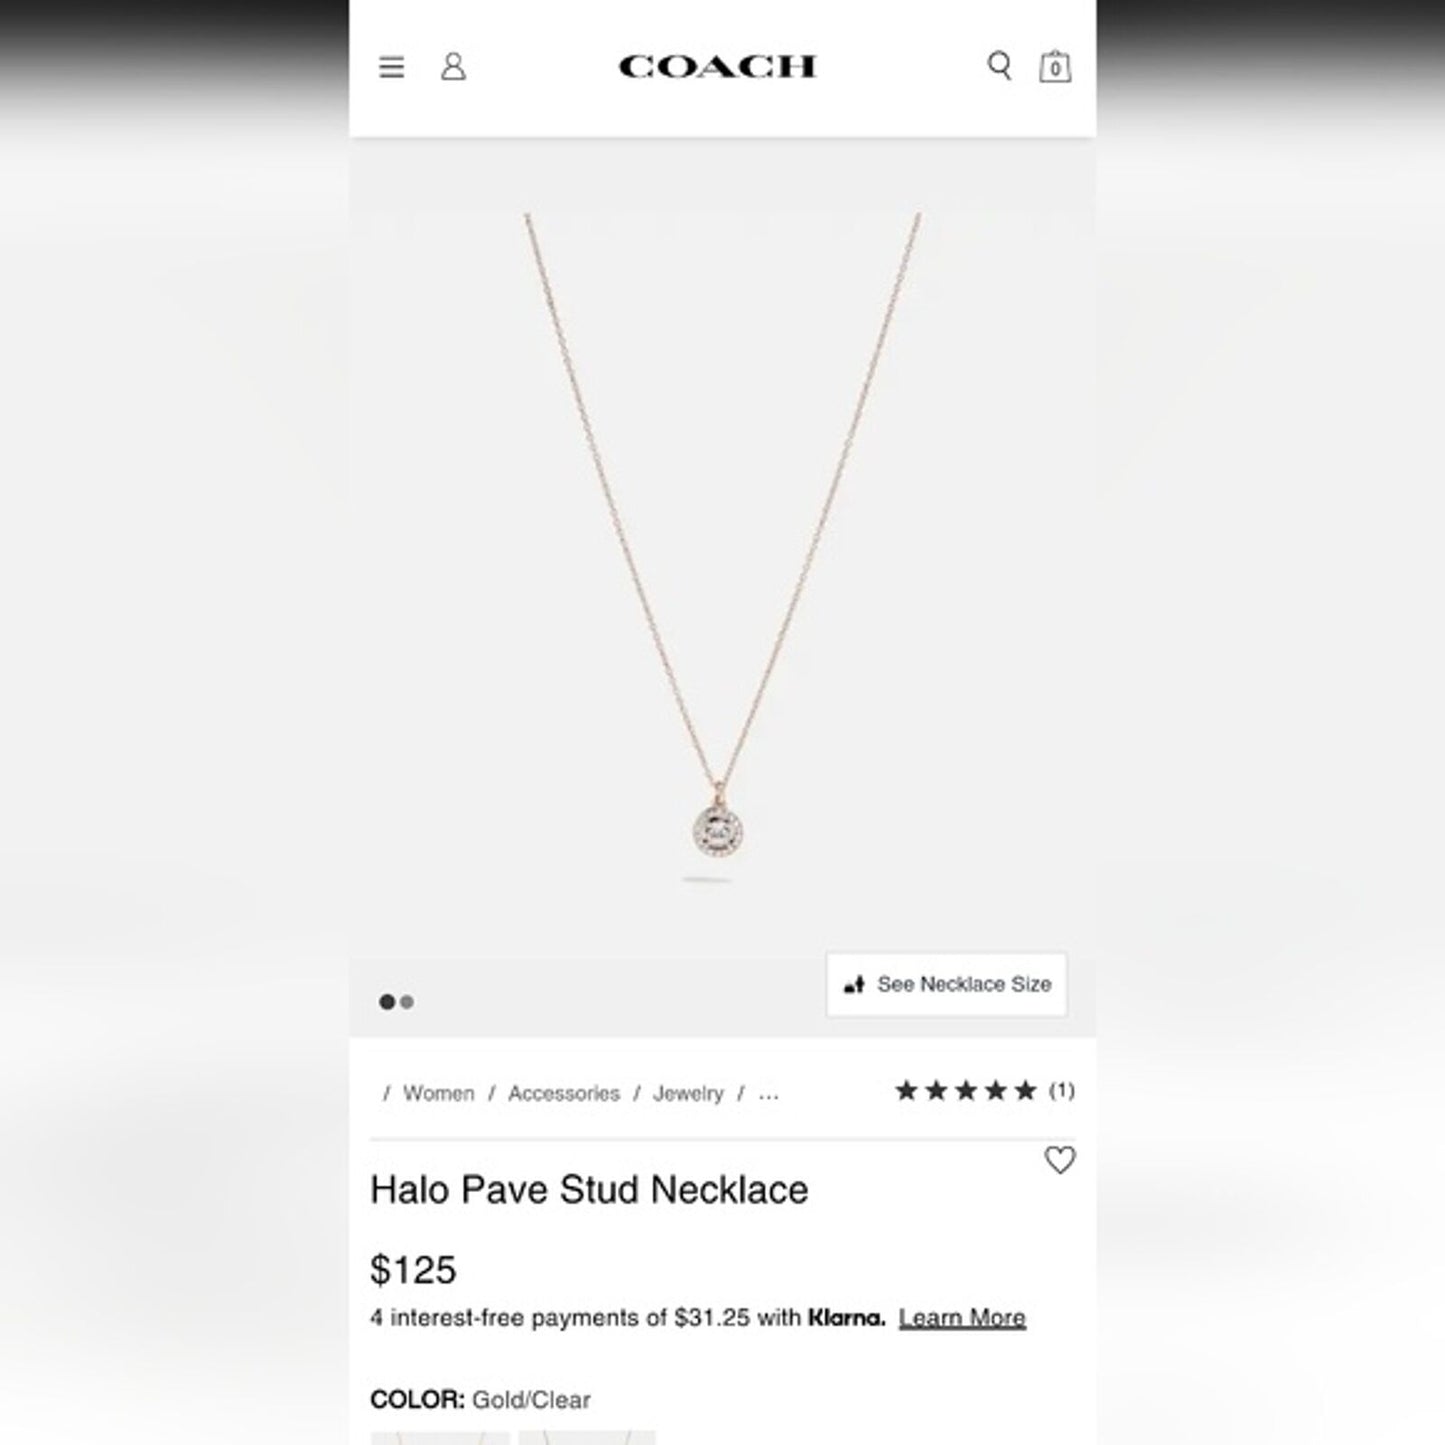 COACH Pave Halo Necklace in Gold NWT $125